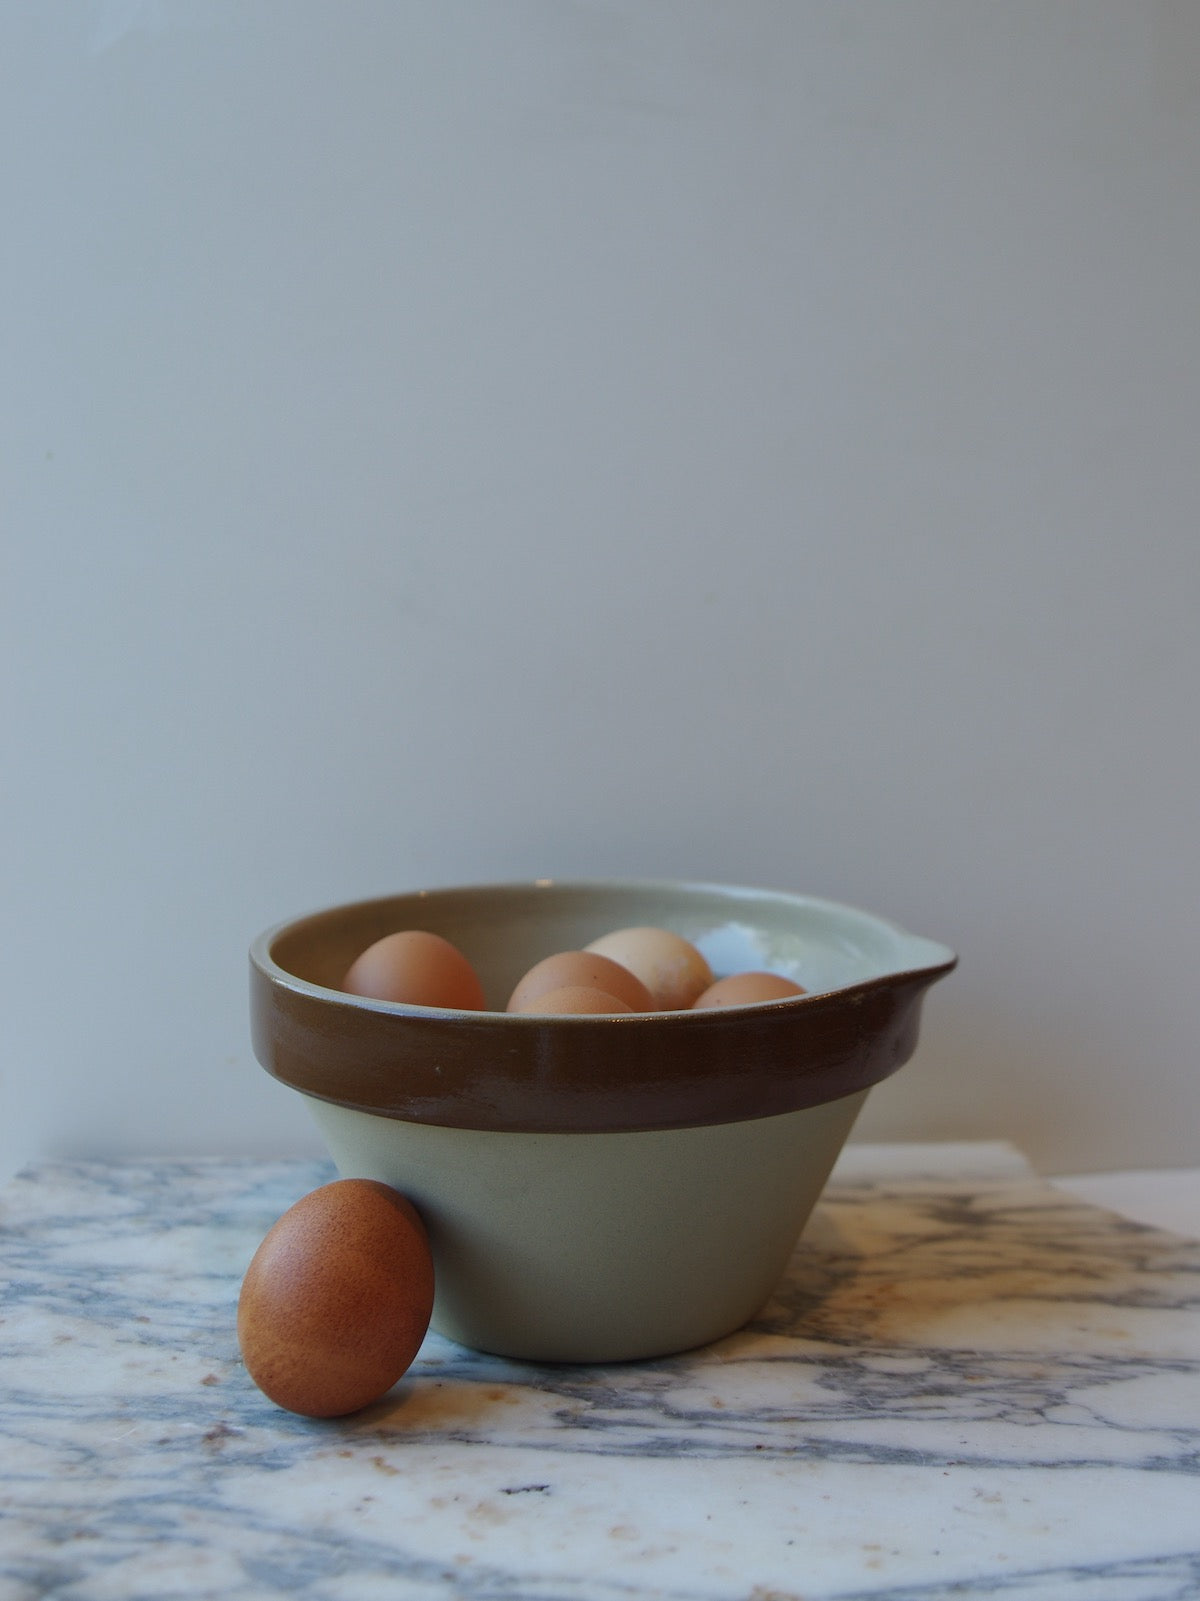 Brown and cream colored mixing bowl with spout full of eggs.